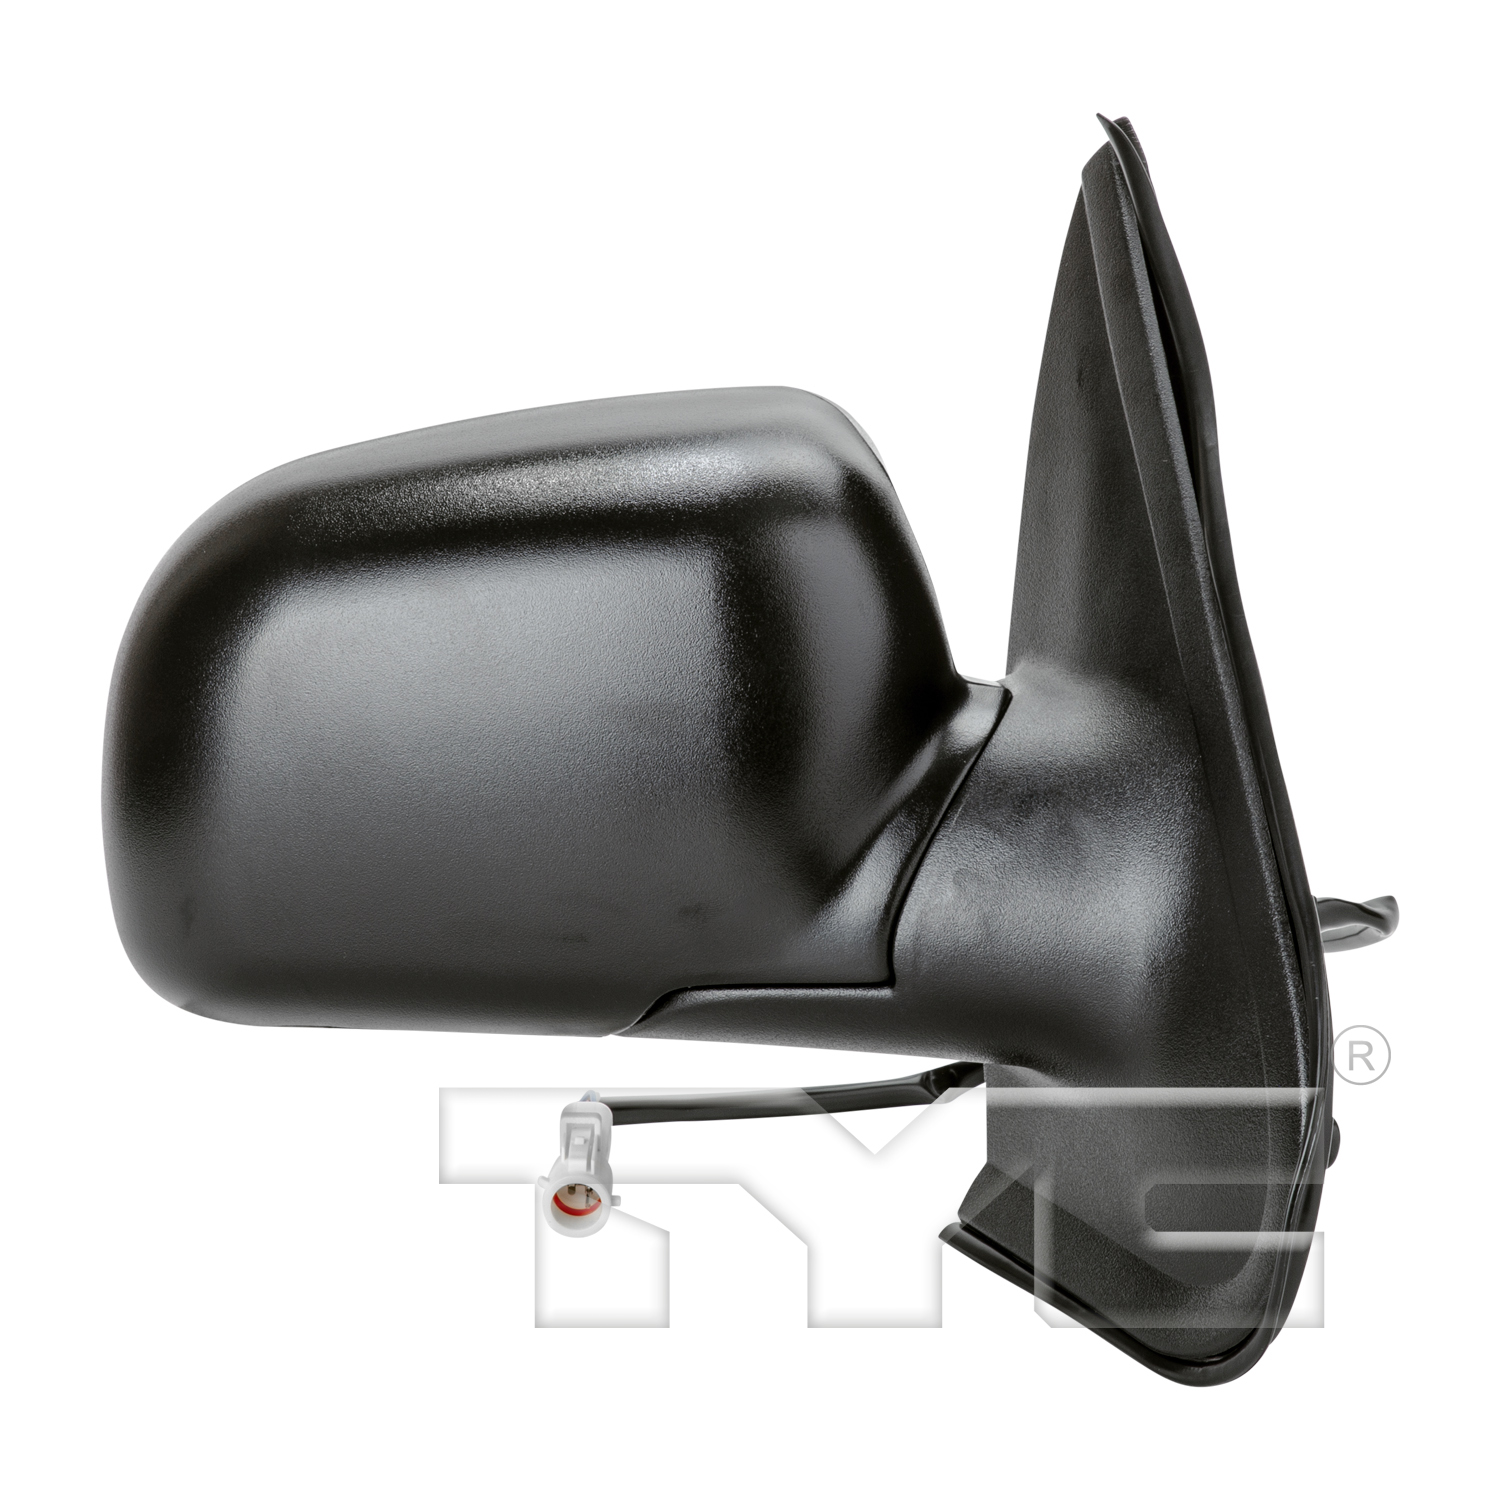 Aftermarket MIRRORS for MERCURY - MOUNTAINEER, MOUNTAINEER,97-01,RT Mirror outside rear view